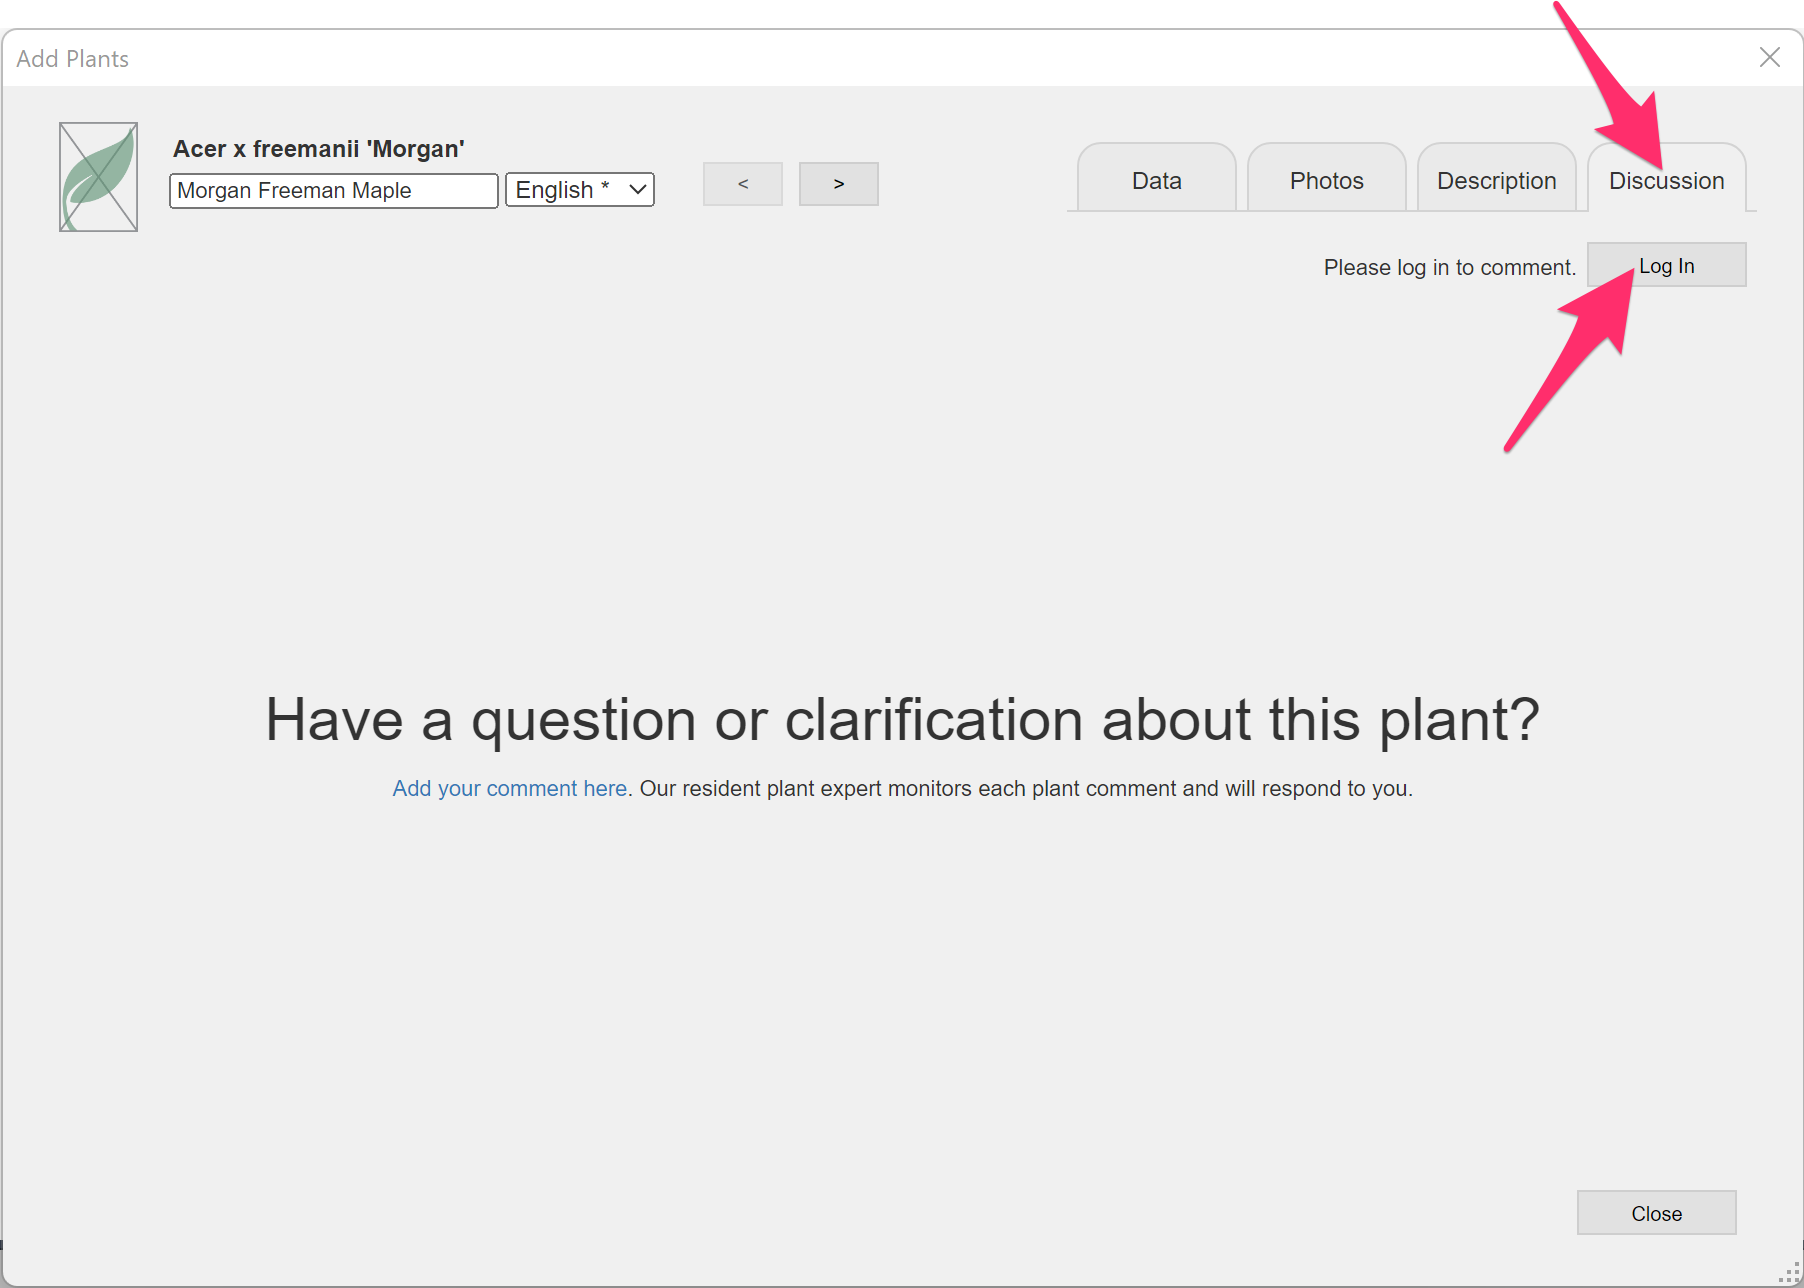  Add Plants dialog box, Discussion tab and Log In button